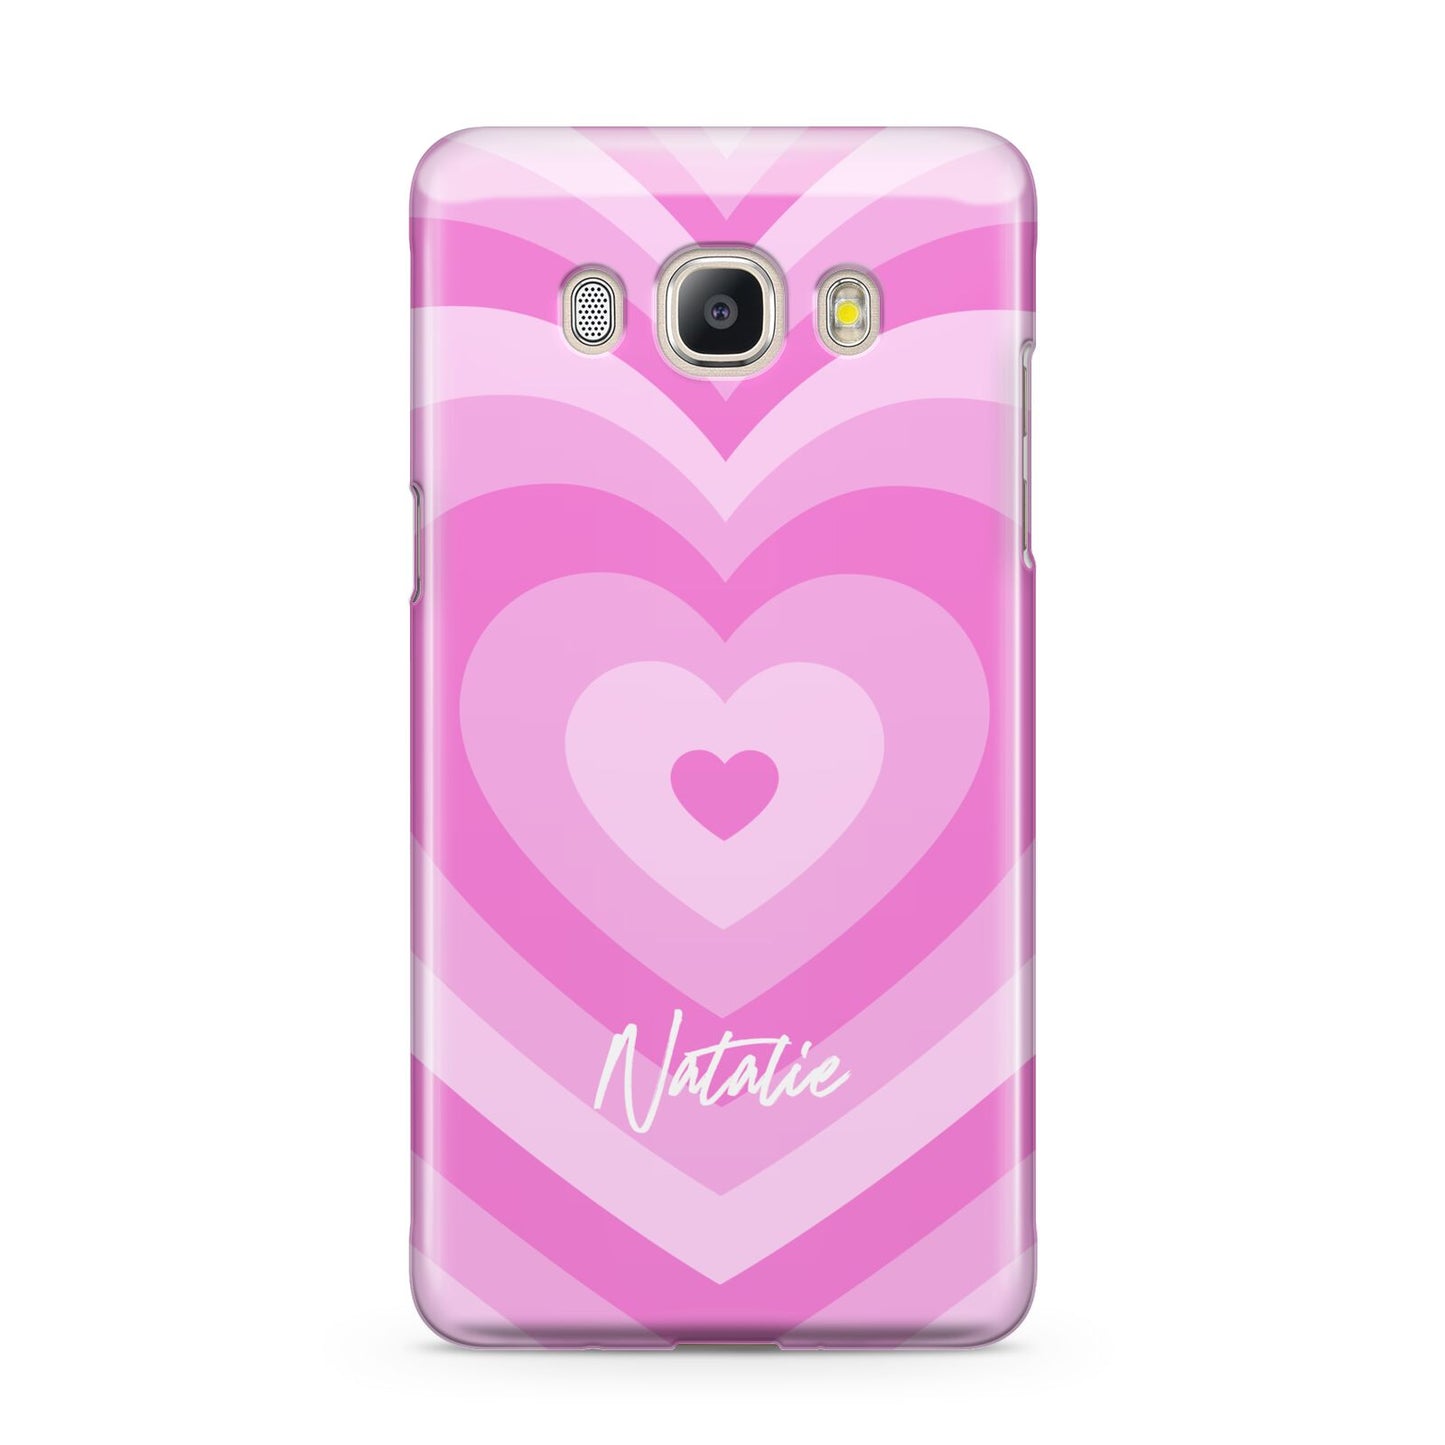 Personalised Pink Heart Samsung Galaxy J5 2016 Case